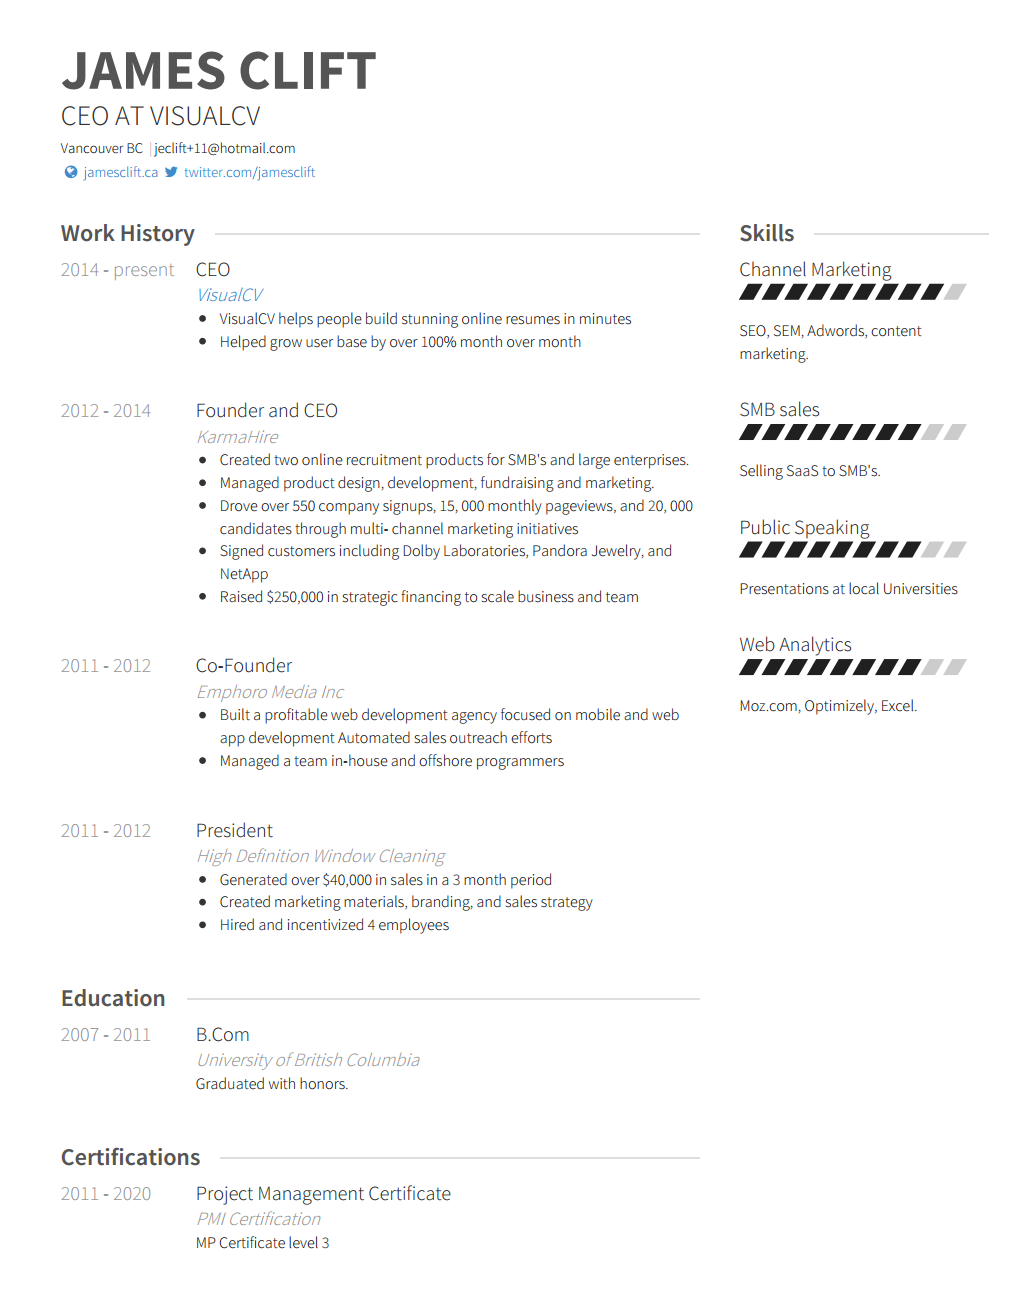 Resume Examples For Jobs Resume Example resume examples for jobs|wikiresume.com